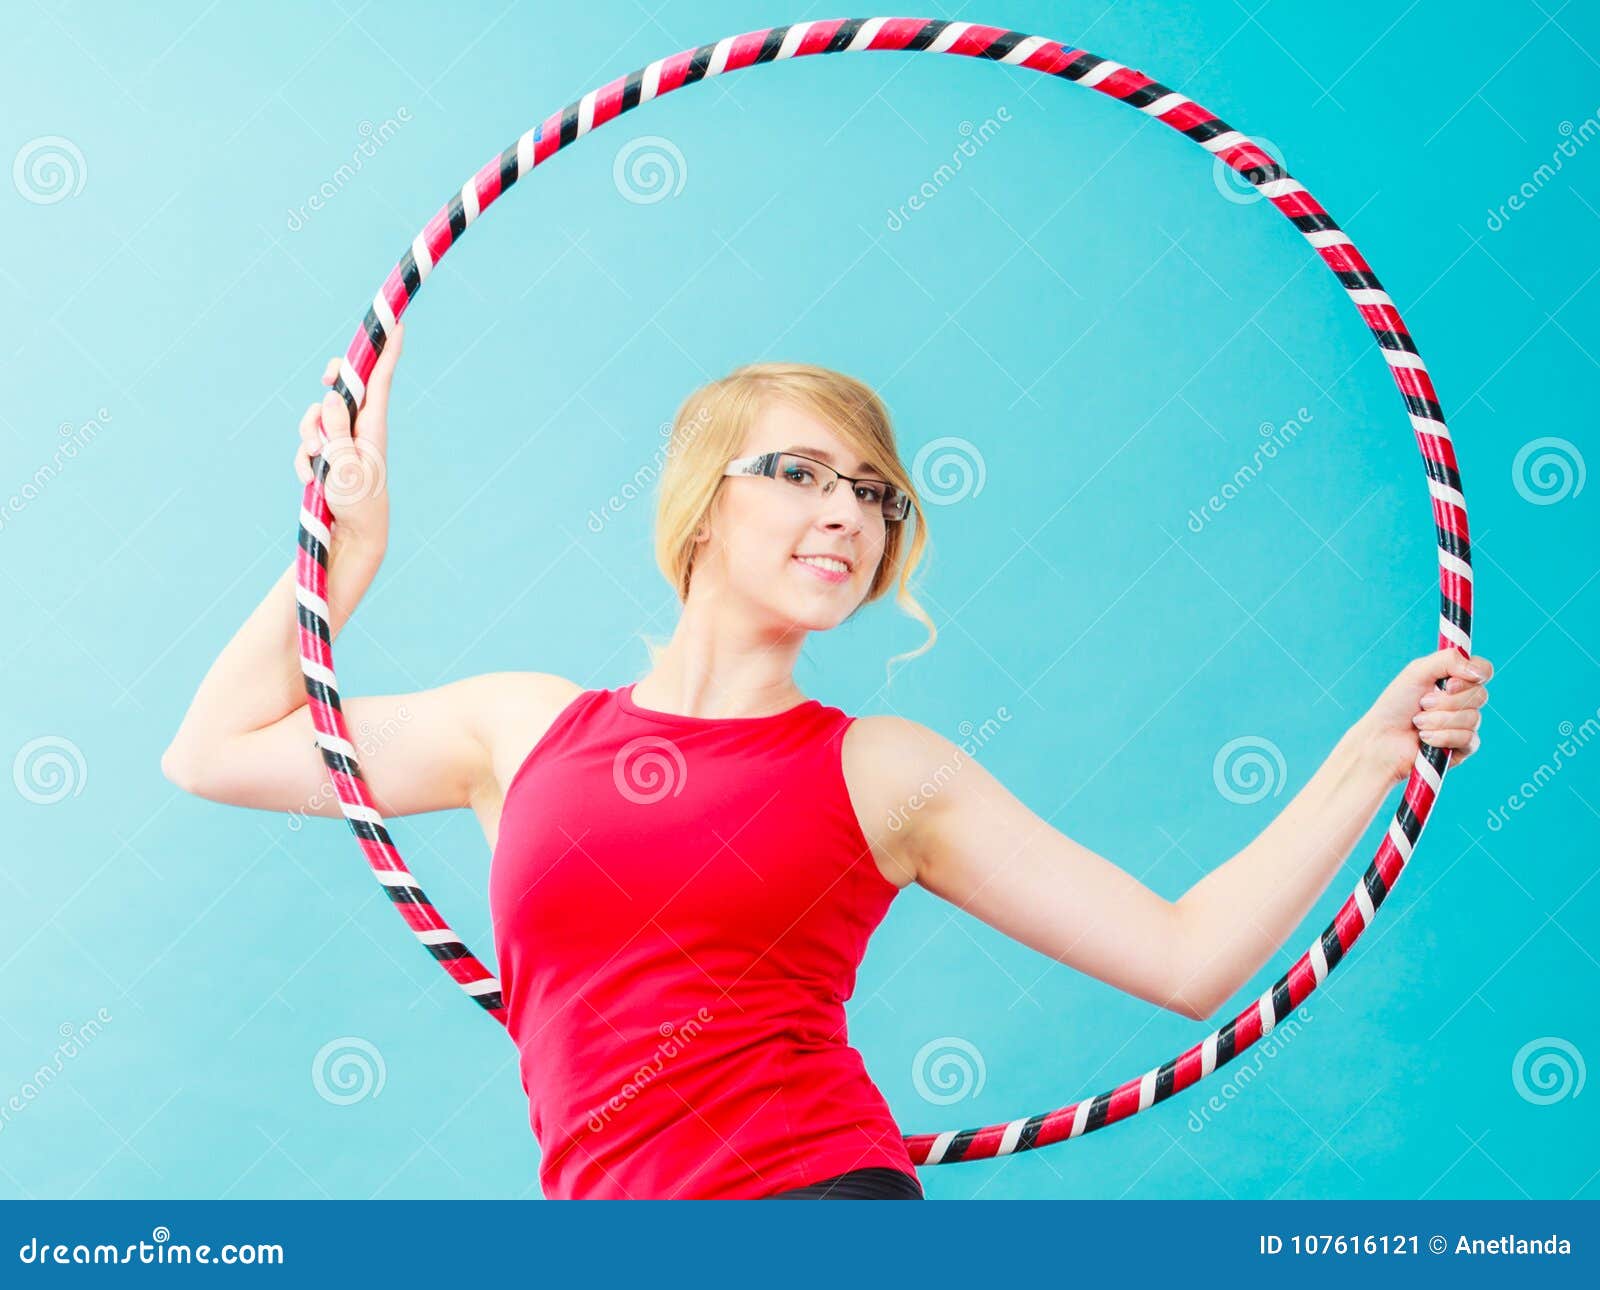 Fit Woman With Hula Hoop Doing Exercise Stock Image Image Of Body Loss 107616121 